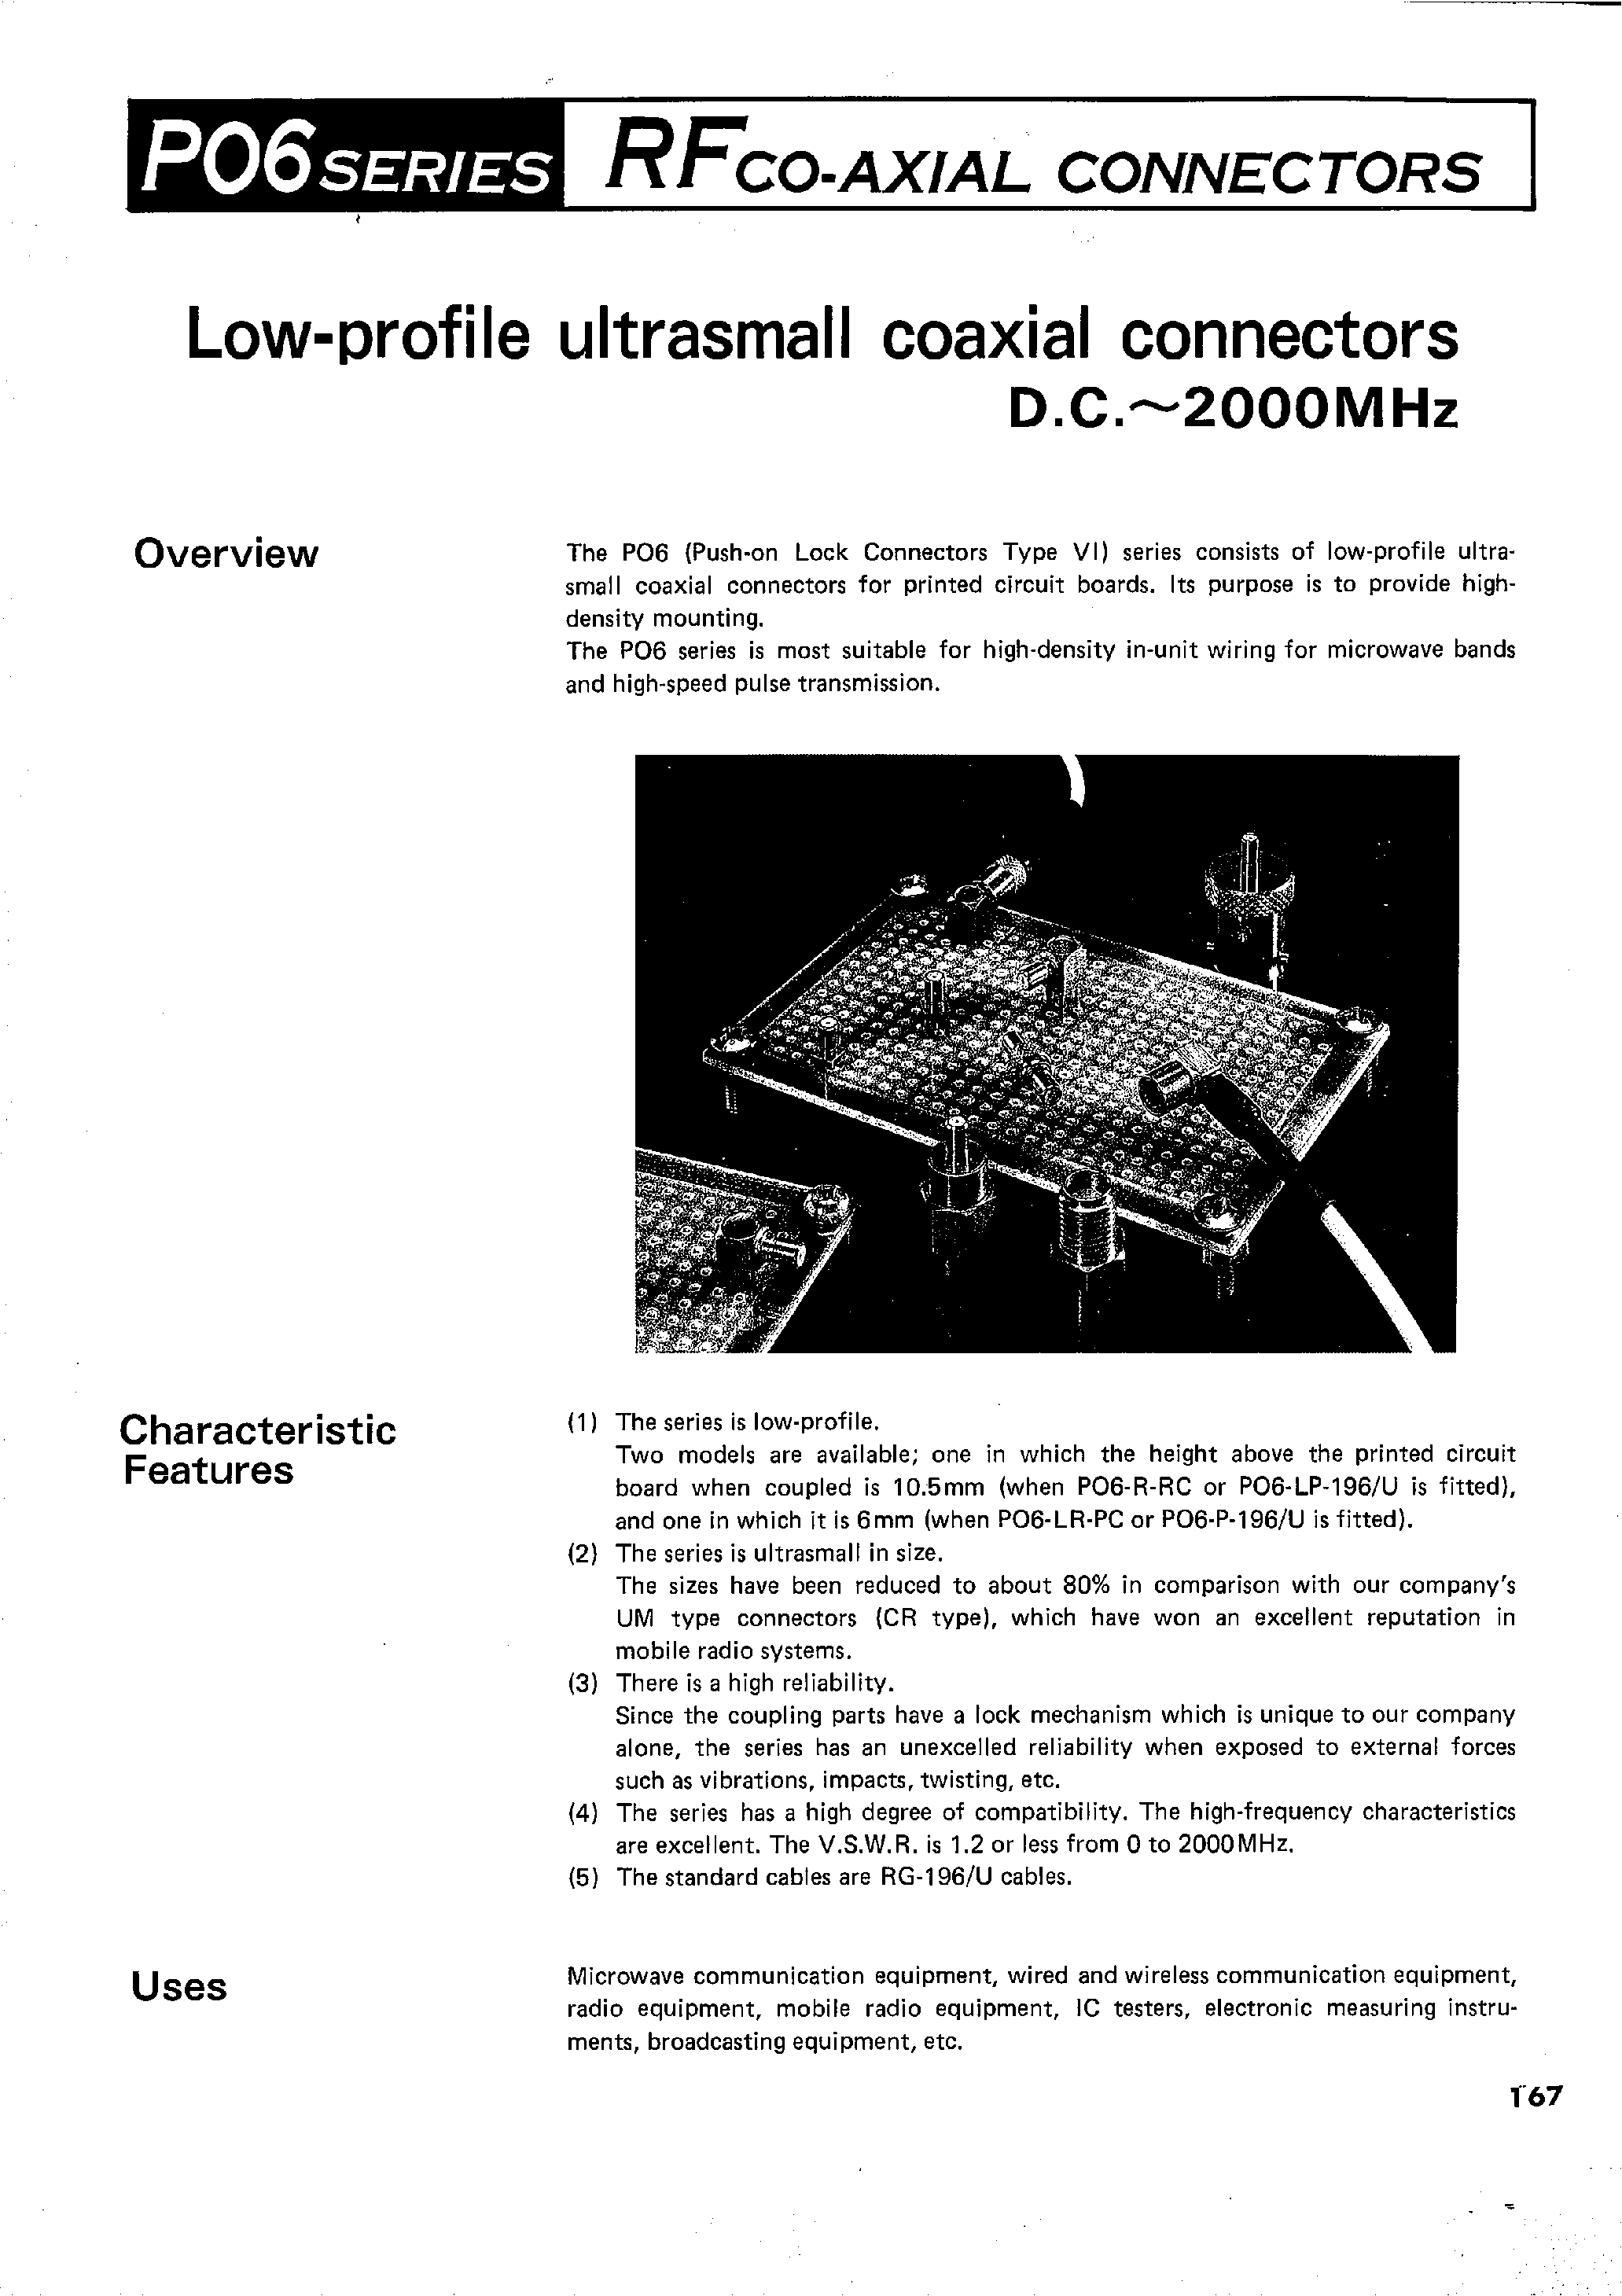 Datasheet PO6-R-PC-1 - RFCO-AXIAL CONNECTORS(Low-profile ultrasmall coaxial connector) page 1